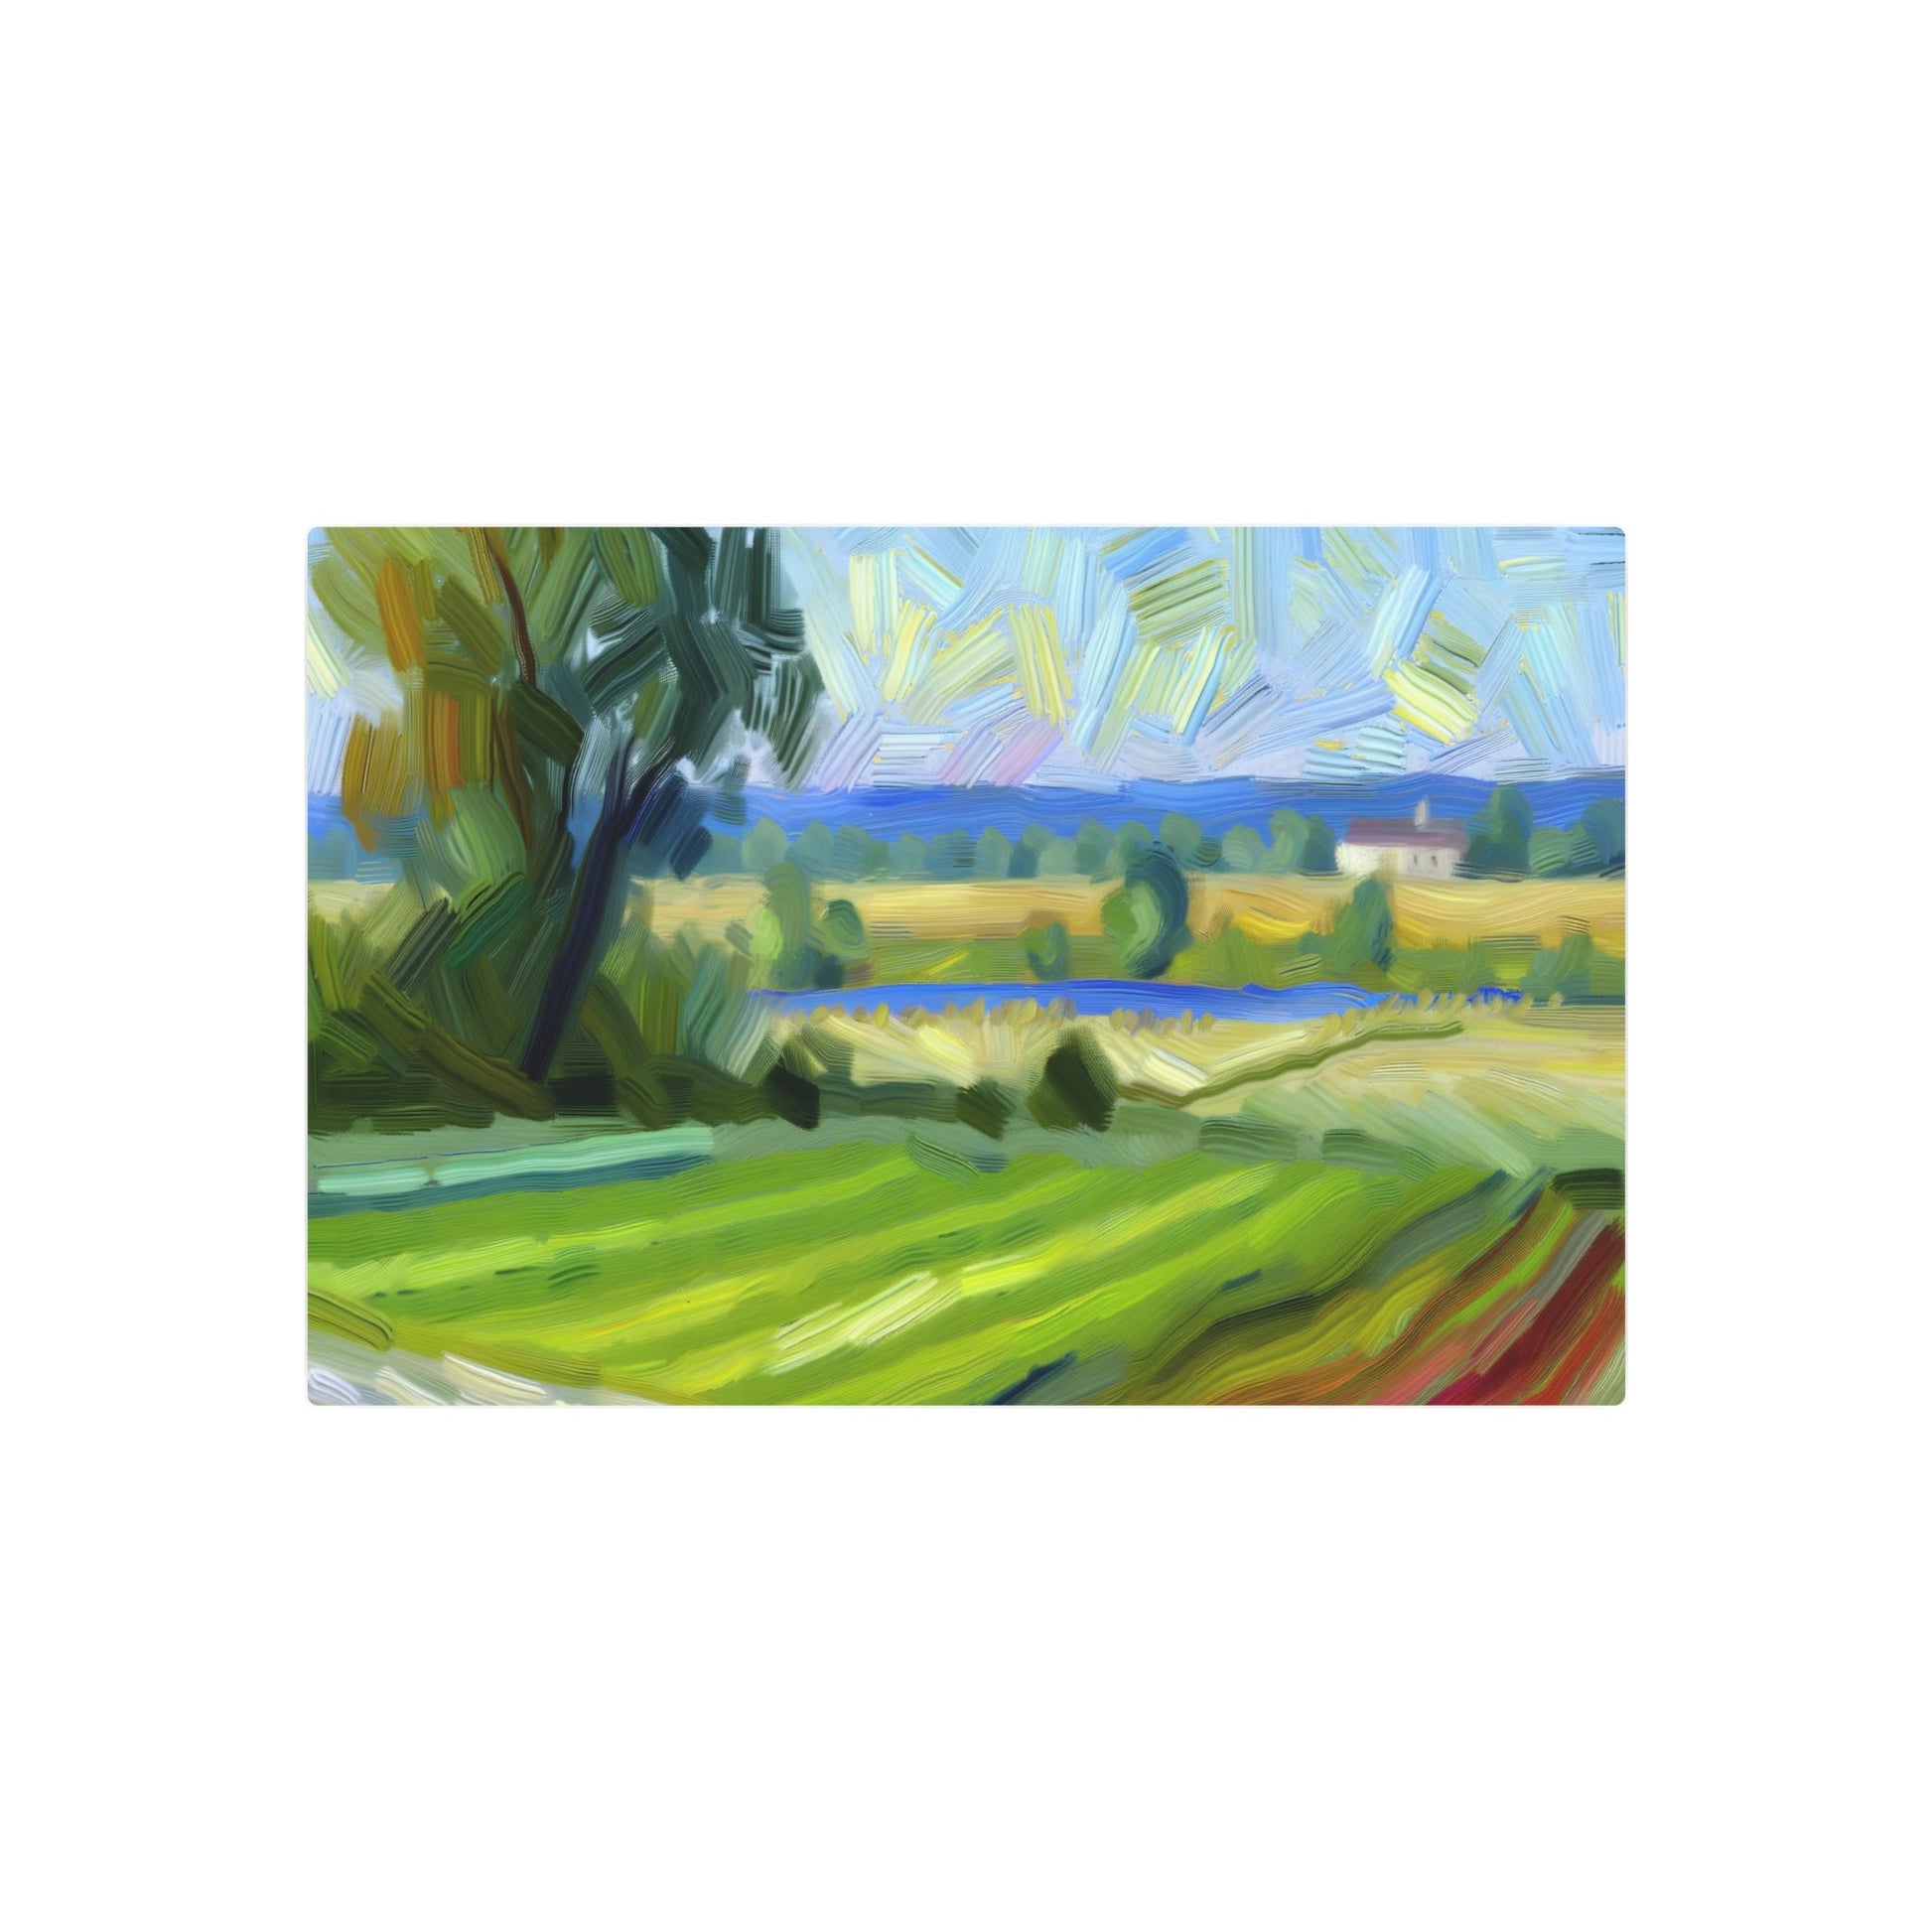 Metal Poster Art | "Impressionist Countryside Landscape Artwork - Vibrant Colors, Visible Brush Strokes, Light & Movement - Dalle-3 Generated Western Style - Metal Poster Art 30″ x 20″ (Horizontal) 0.12''